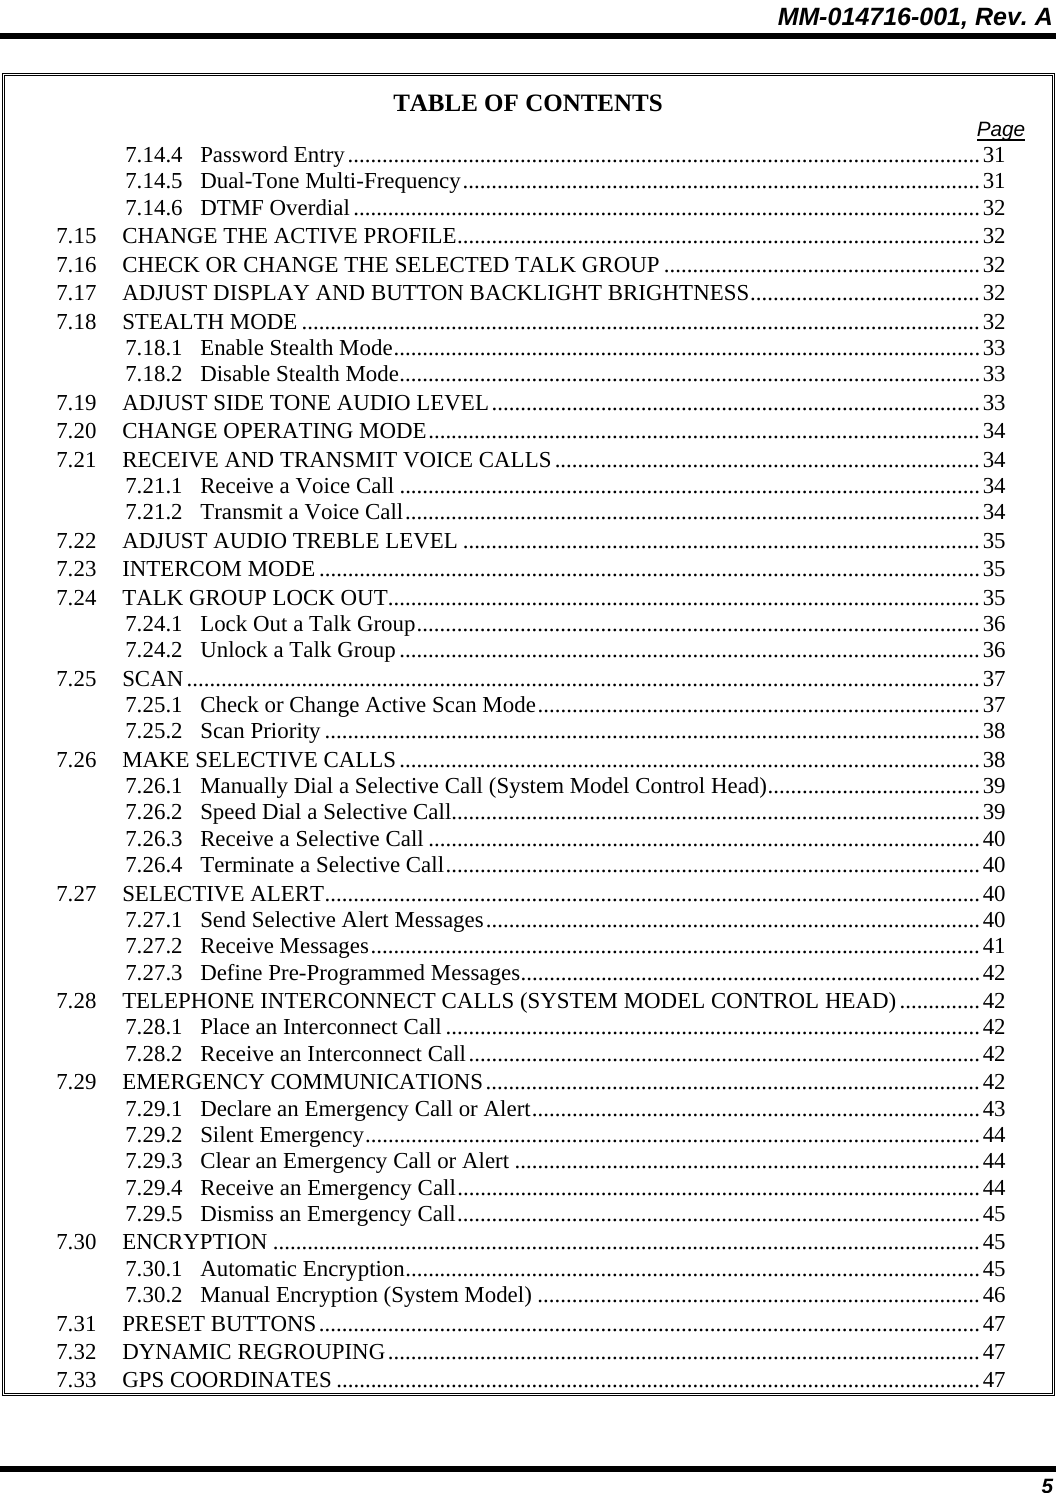 MM-014716-001, Rev. A 5 TABLE OF CONTENTS  Page 7.14.4 Password Entry..............................................................................................................31 7.14.5 Dual-Tone Multi-Frequency..........................................................................................31 7.14.6 DTMF Overdial.............................................................................................................32 7.15 CHANGE THE ACTIVE PROFILE...........................................................................................32 7.16 CHECK OR CHANGE THE SELECTED TALK GROUP .......................................................32 7.17 ADJUST DISPLAY AND BUTTON BACKLIGHT BRIGHTNESS........................................32 7.18 STEALTH MODE ......................................................................................................................32 7.18.1 Enable Stealth Mode......................................................................................................33 7.18.2 Disable Stealth Mode.....................................................................................................33 7.19 ADJUST SIDE TONE AUDIO LEVEL.....................................................................................33 7.20 CHANGE OPERATING MODE................................................................................................34 7.21 RECEIVE AND TRANSMIT VOICE CALLS..........................................................................34 7.21.1 Receive a Voice Call .....................................................................................................34 7.21.2 Transmit a Voice Call....................................................................................................34 7.22 ADJUST AUDIO TREBLE LEVEL ..........................................................................................35 7.23 INTERCOM MODE...................................................................................................................35 7.24 TALK GROUP LOCK OUT.......................................................................................................35 7.24.1 Lock Out a Talk Group..................................................................................................36 7.24.2 Unlock a Talk Group.....................................................................................................36 7.25 SCAN..........................................................................................................................................37 7.25.1 Check or Change Active Scan Mode.............................................................................37 7.25.2 Scan Priority..................................................................................................................38 7.26 MAKE SELECTIVE CALLS.....................................................................................................38 7.26.1 Manually Dial a Selective Call (System Model Control Head).....................................39 7.26.2 Speed Dial a Selective Call............................................................................................39 7.26.3 Receive a Selective Call ................................................................................................40 7.26.4 Terminate a Selective Call.............................................................................................40 7.27 SELECTIVE ALERT..................................................................................................................40 7.27.1 Send Selective Alert Messages......................................................................................40 7.27.2 Receive Messages..........................................................................................................41 7.27.3 Define Pre-Programmed Messages................................................................................42 7.28 TELEPHONE INTERCONNECT CALLS (SYSTEM MODEL CONTROL HEAD)..............42 7.28.1 Place an Interconnect Call.............................................................................................42 7.28.2 Receive an Interconnect Call.........................................................................................42 7.29 EMERGENCY COMMUNICATIONS......................................................................................42 7.29.1 Declare an Emergency Call or Alert..............................................................................43 7.29.2 Silent Emergency...........................................................................................................44 7.29.3 Clear an Emergency Call or Alert .................................................................................44 7.29.4 Receive an Emergency Call...........................................................................................44 7.29.5 Dismiss an Emergency Call...........................................................................................45 7.30 ENCRYPTION ...........................................................................................................................45 7.30.1 Automatic Encryption....................................................................................................45 7.30.2 Manual Encryption (System Model) .............................................................................46 7.31 PRESET BUTTONS...................................................................................................................47 7.32 DYNAMIC REGROUPING.......................................................................................................47 7.33 GPS COORDINATES ................................................................................................................47 